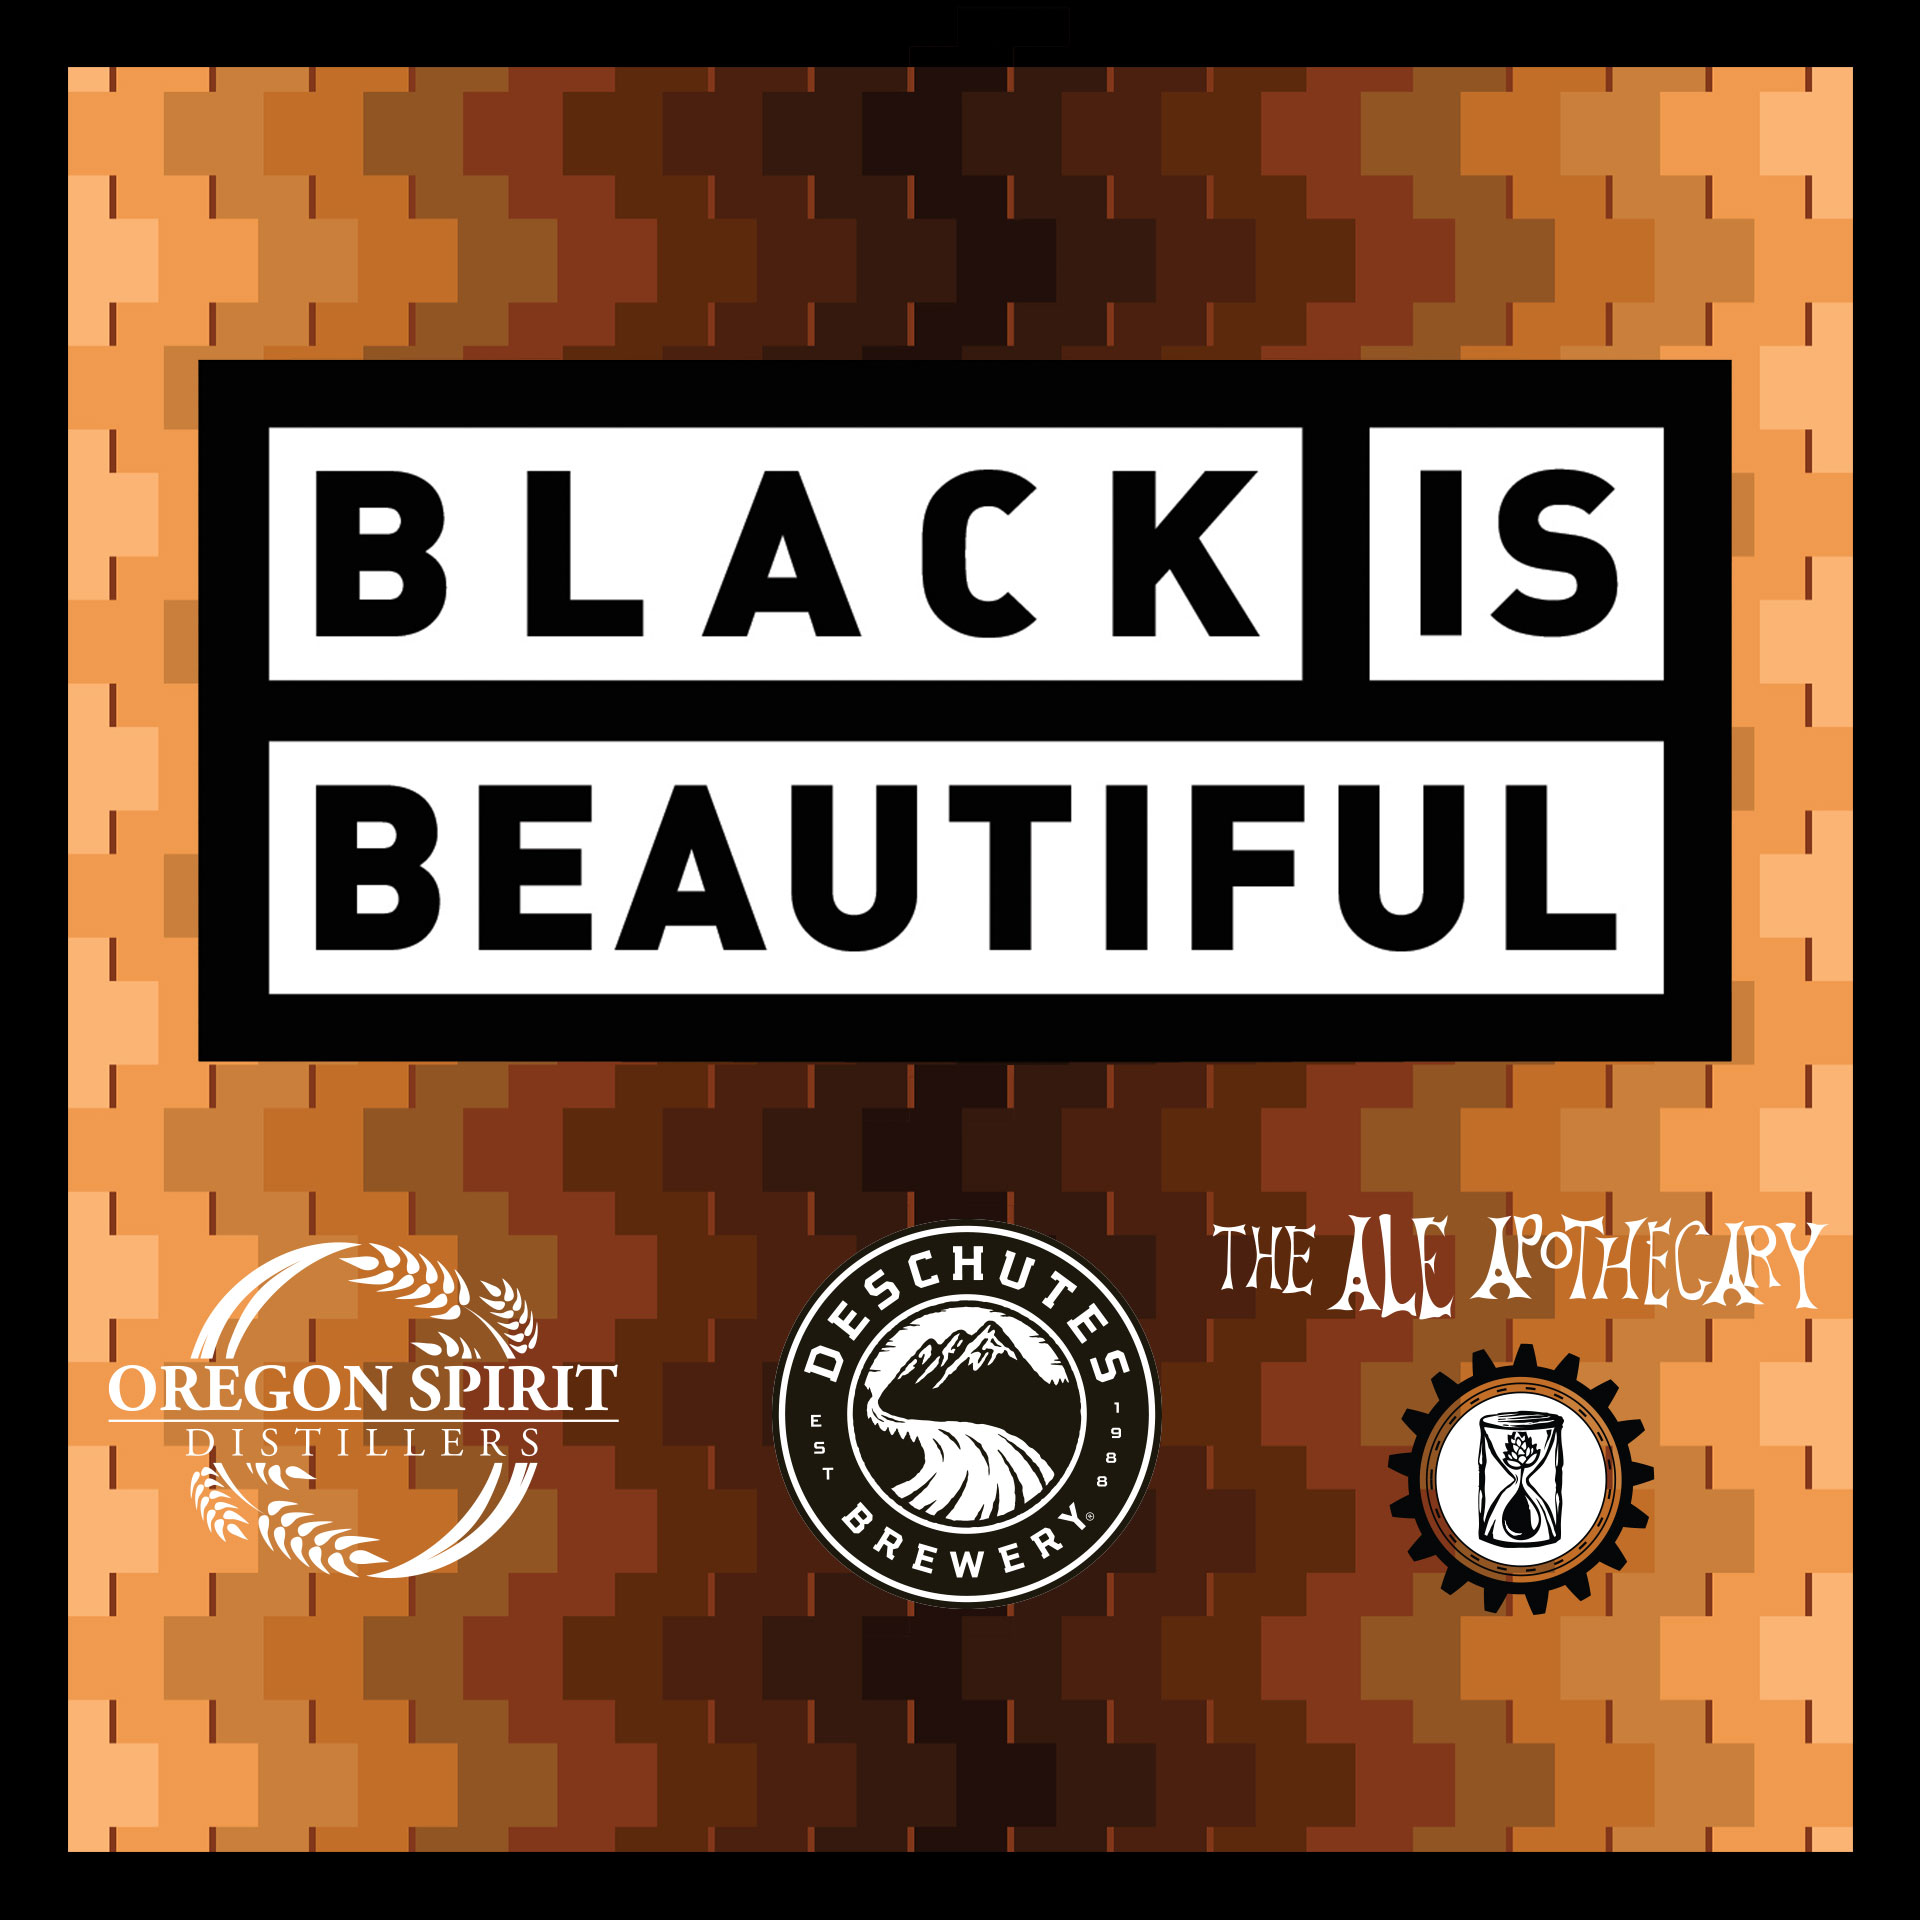 Deschutes Brewery and The Ale Apothecary Black is Beautiful